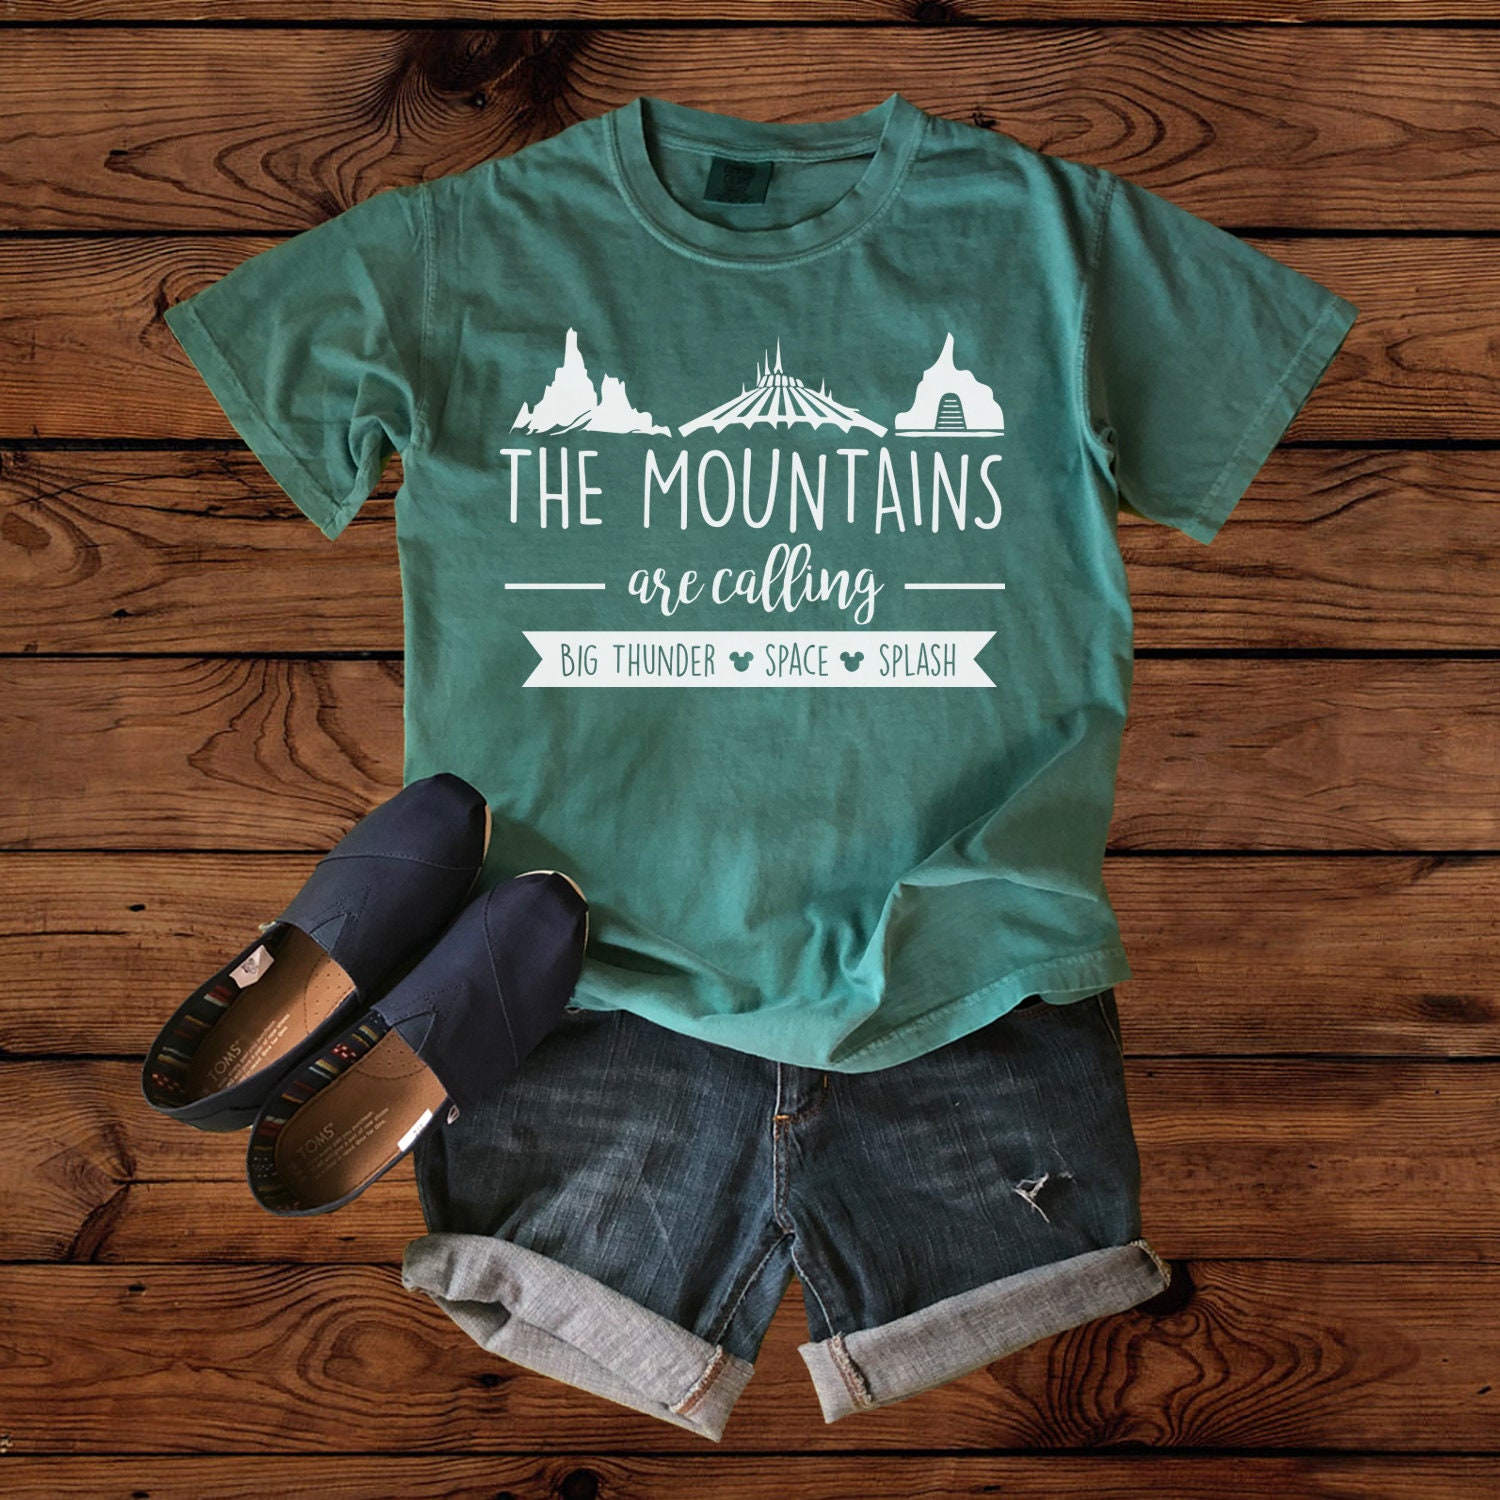 Download Disney Shirts Disney Shirt The Mountains are Calling | Etsy